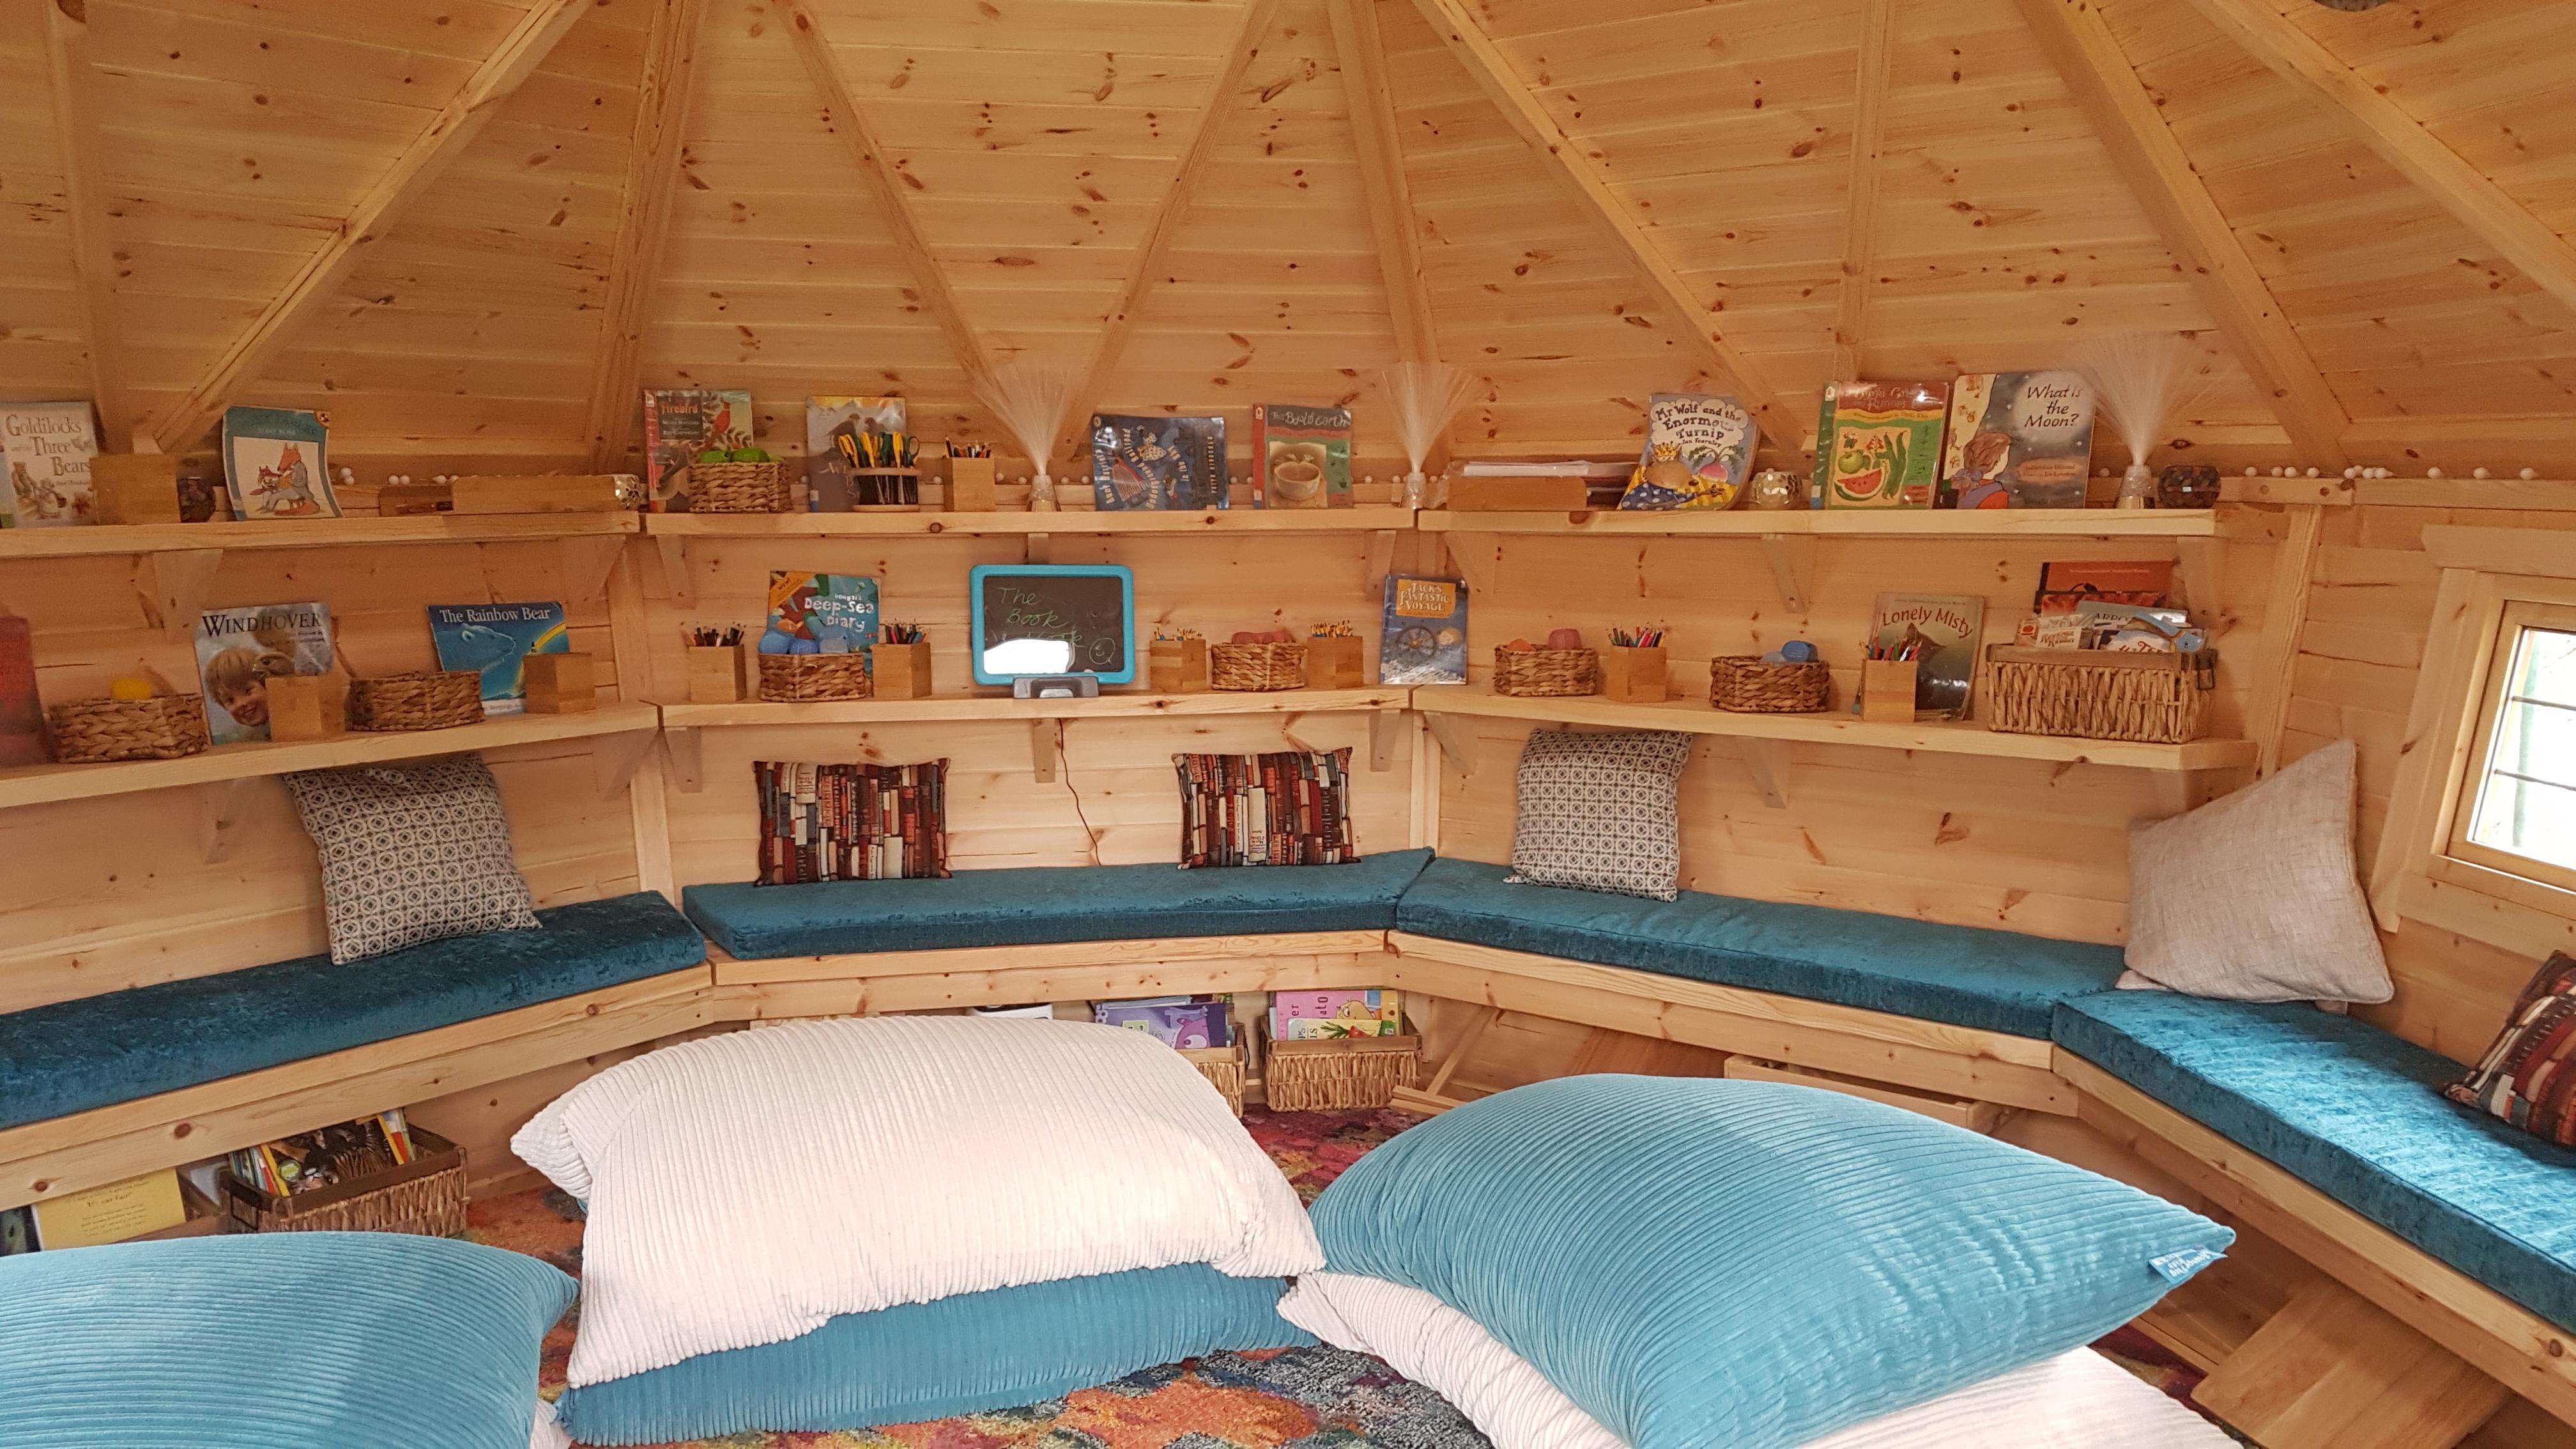 Cabins For Schools designated reading space in log cabin build